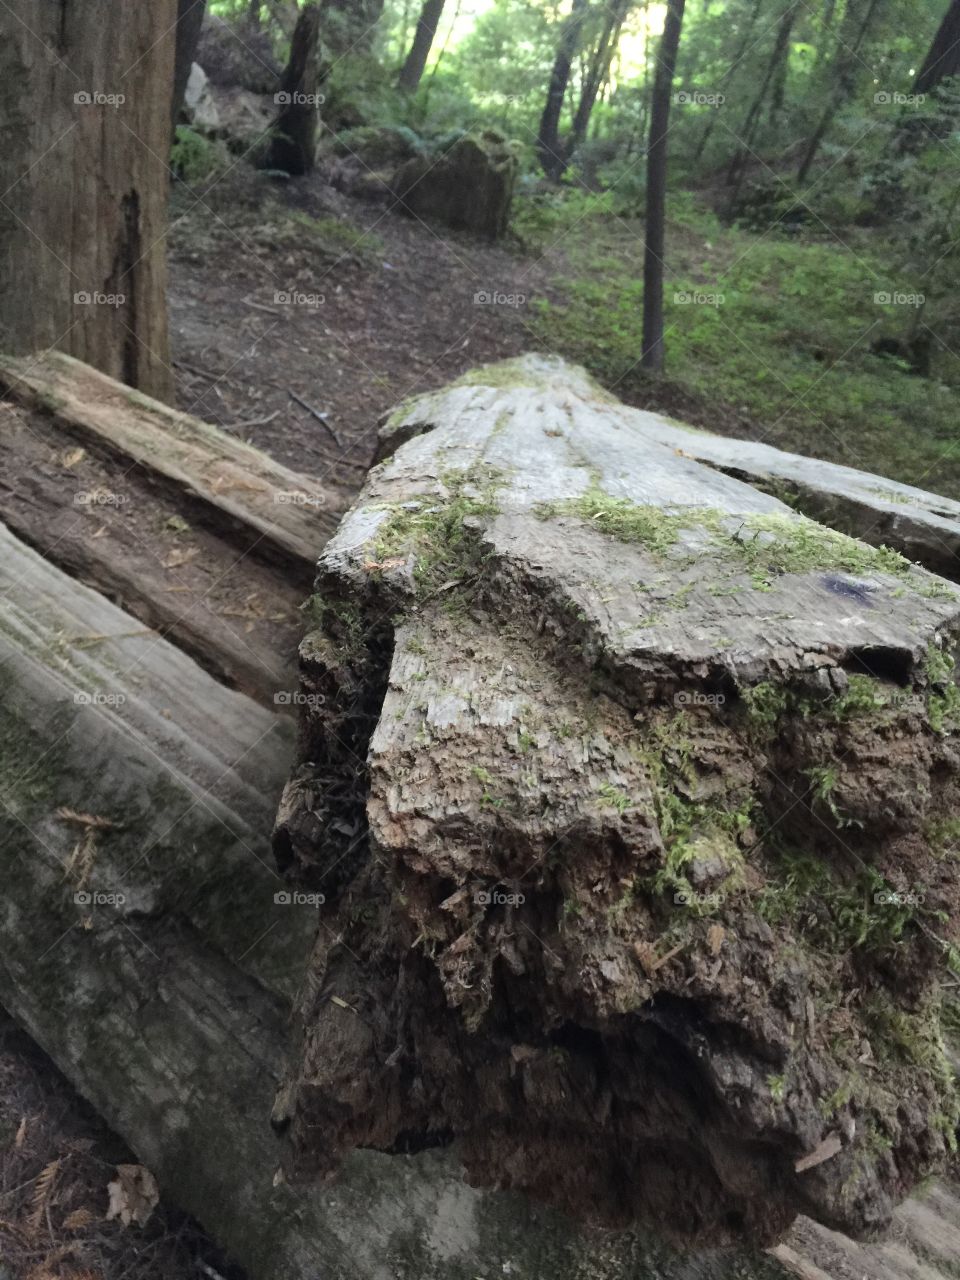 Remains of a very old fallen tree in the redwoods national forest